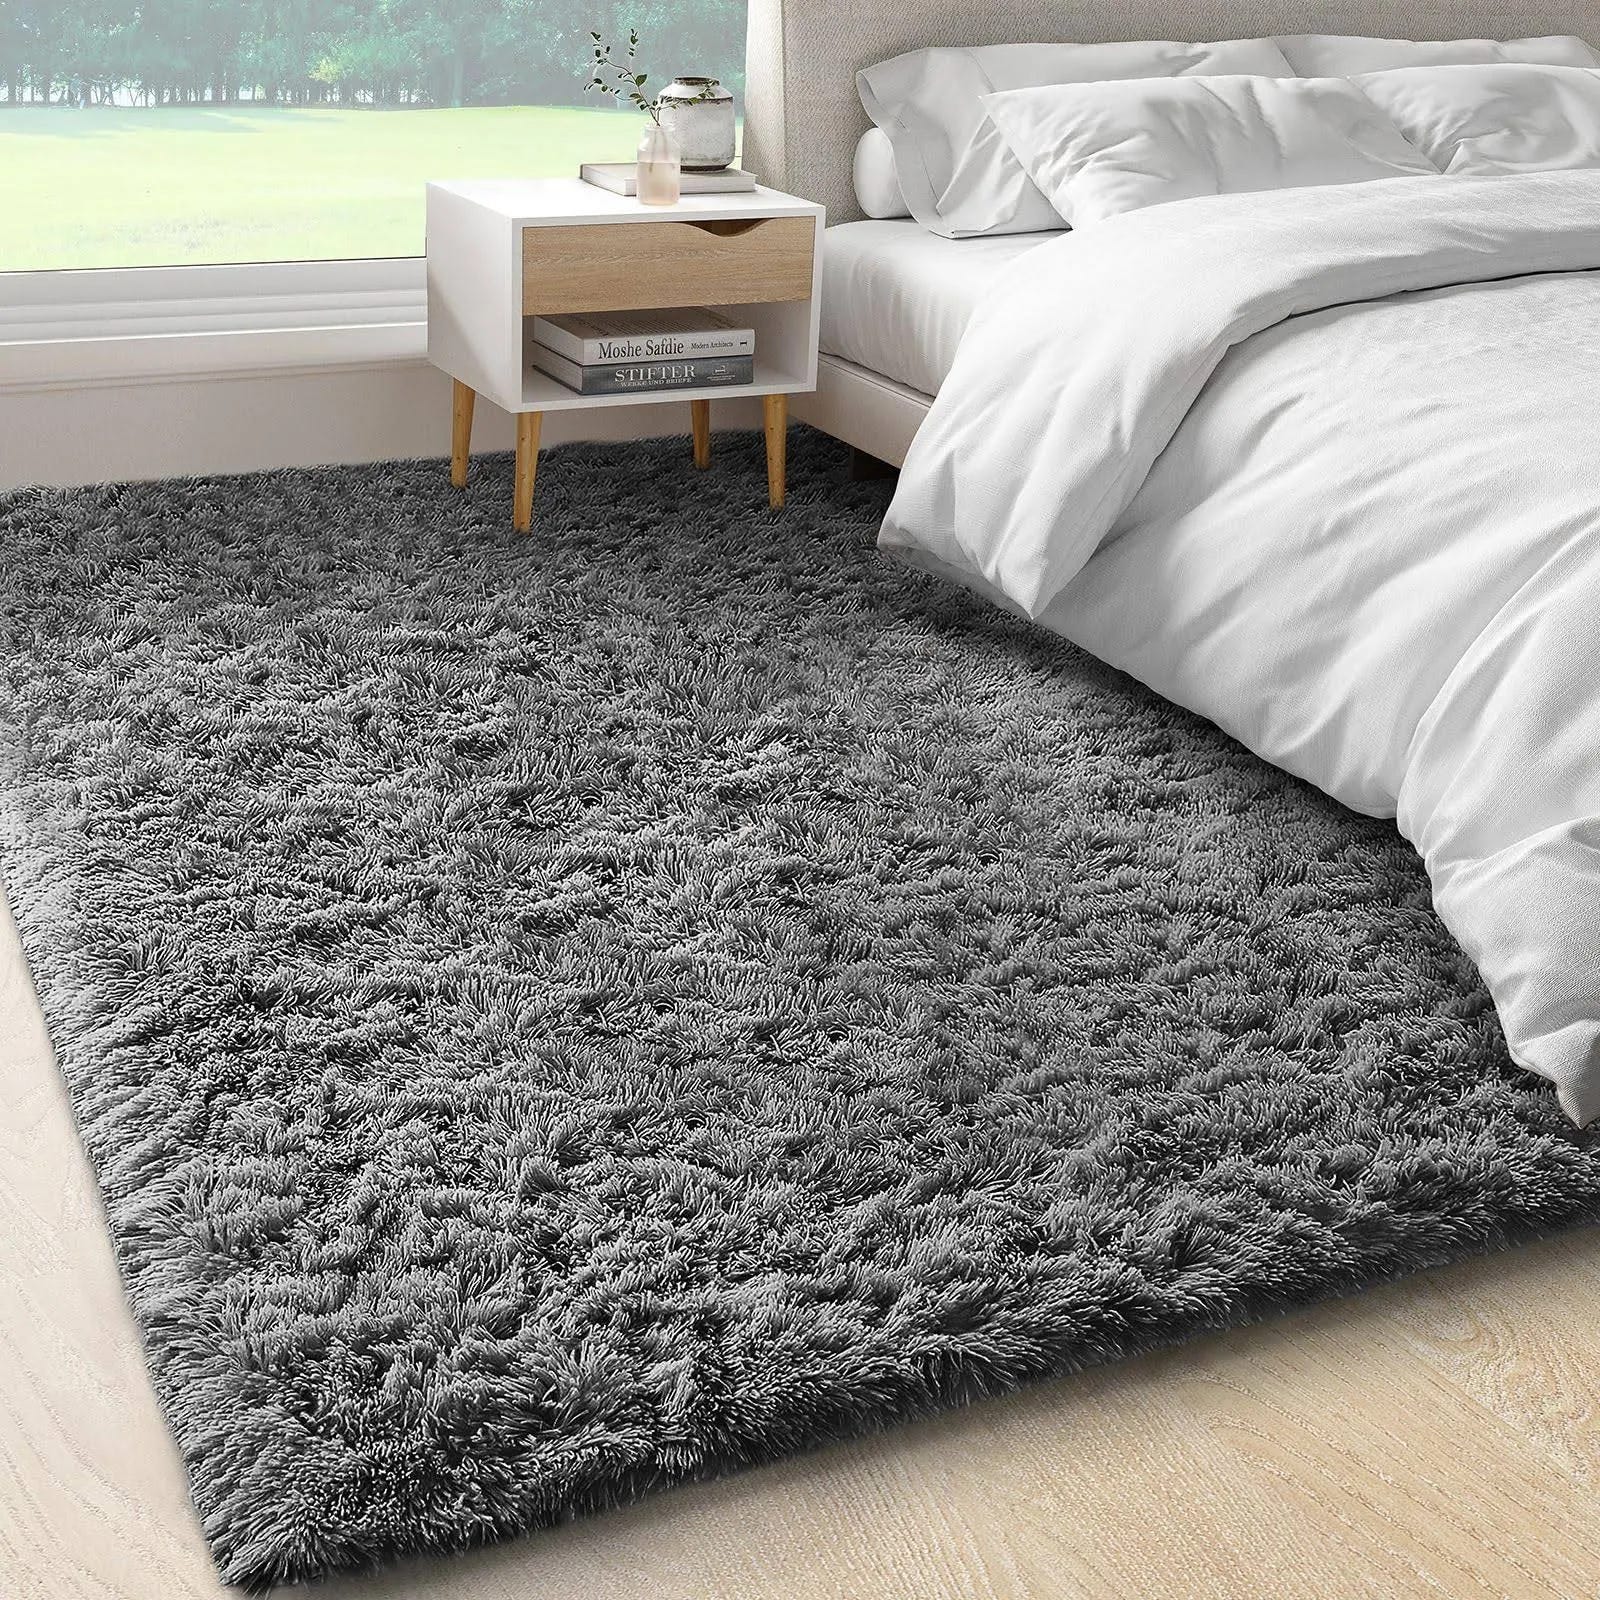 Luxurious Synthetic Shag Rug with Non-Slip Bottom for Home Decor | Image